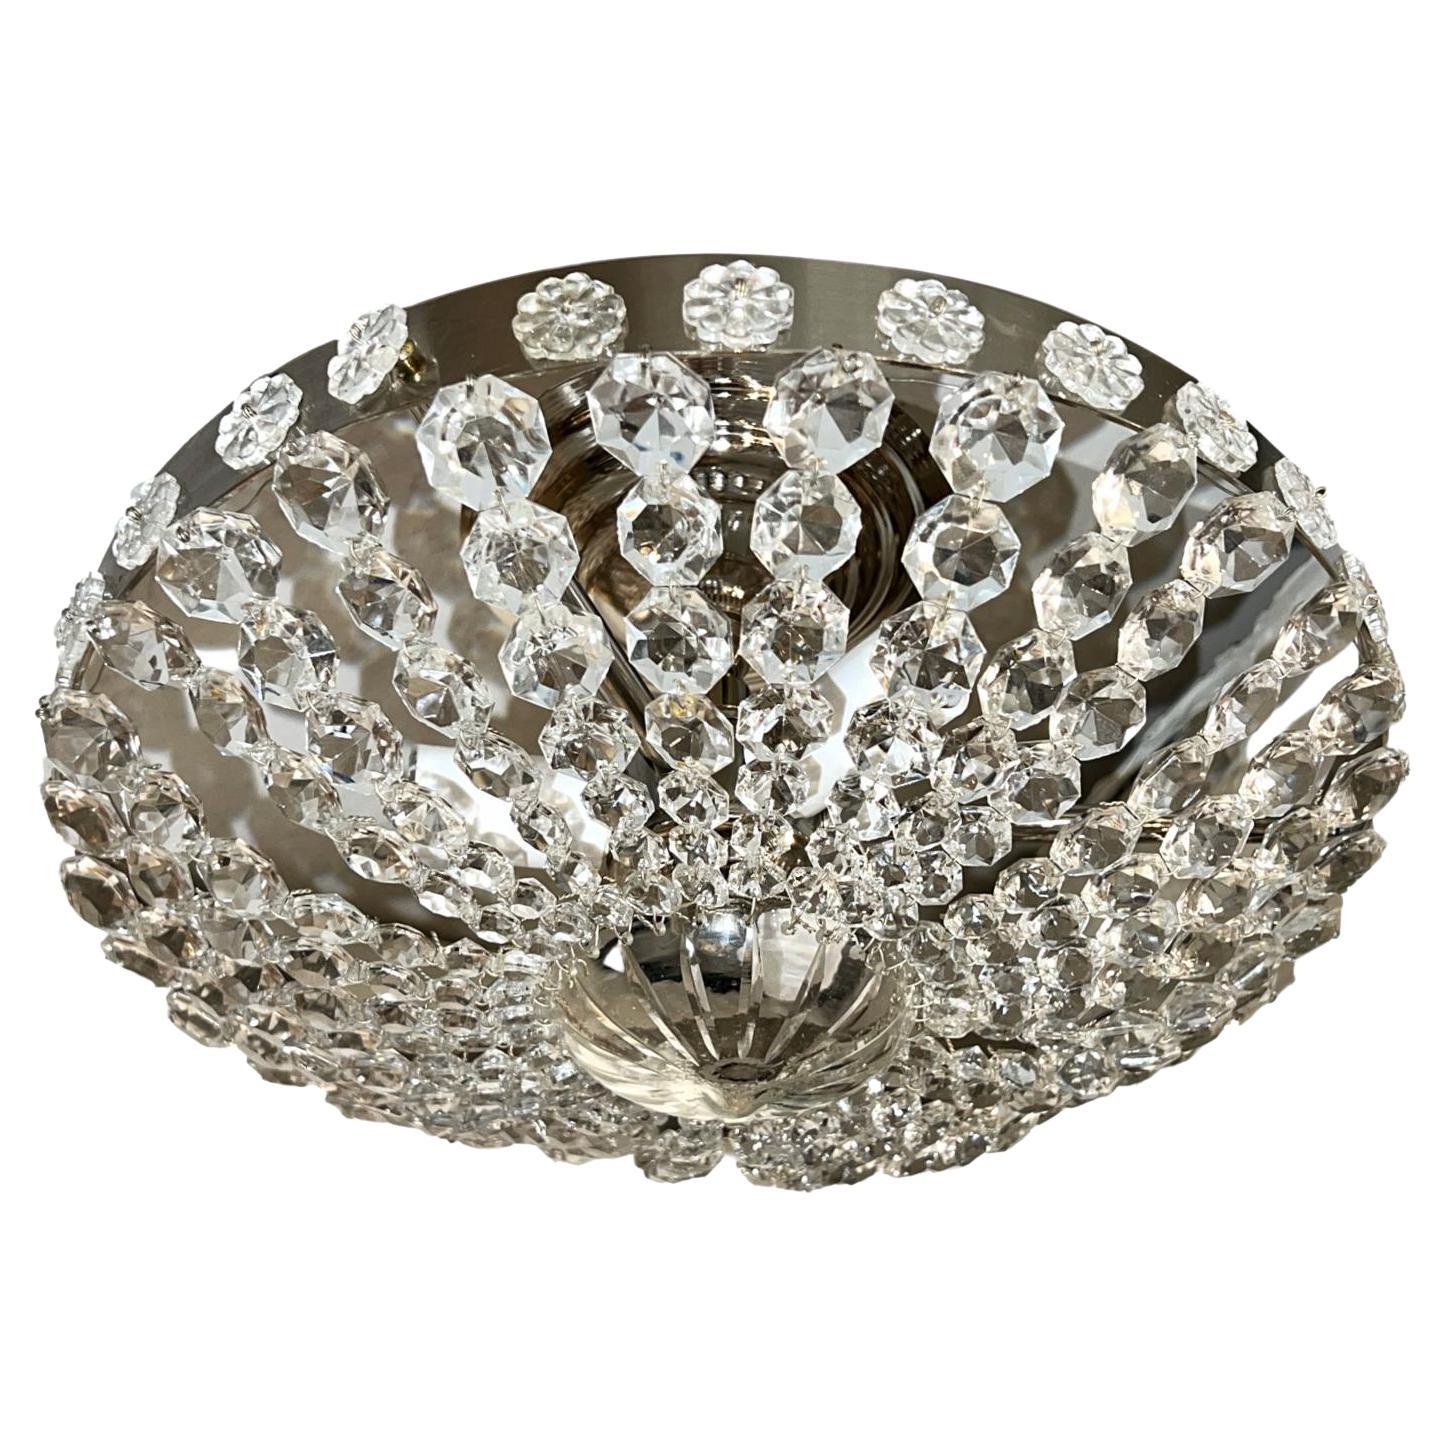 Set of French Crystal Light Fixtures, Sold Individually